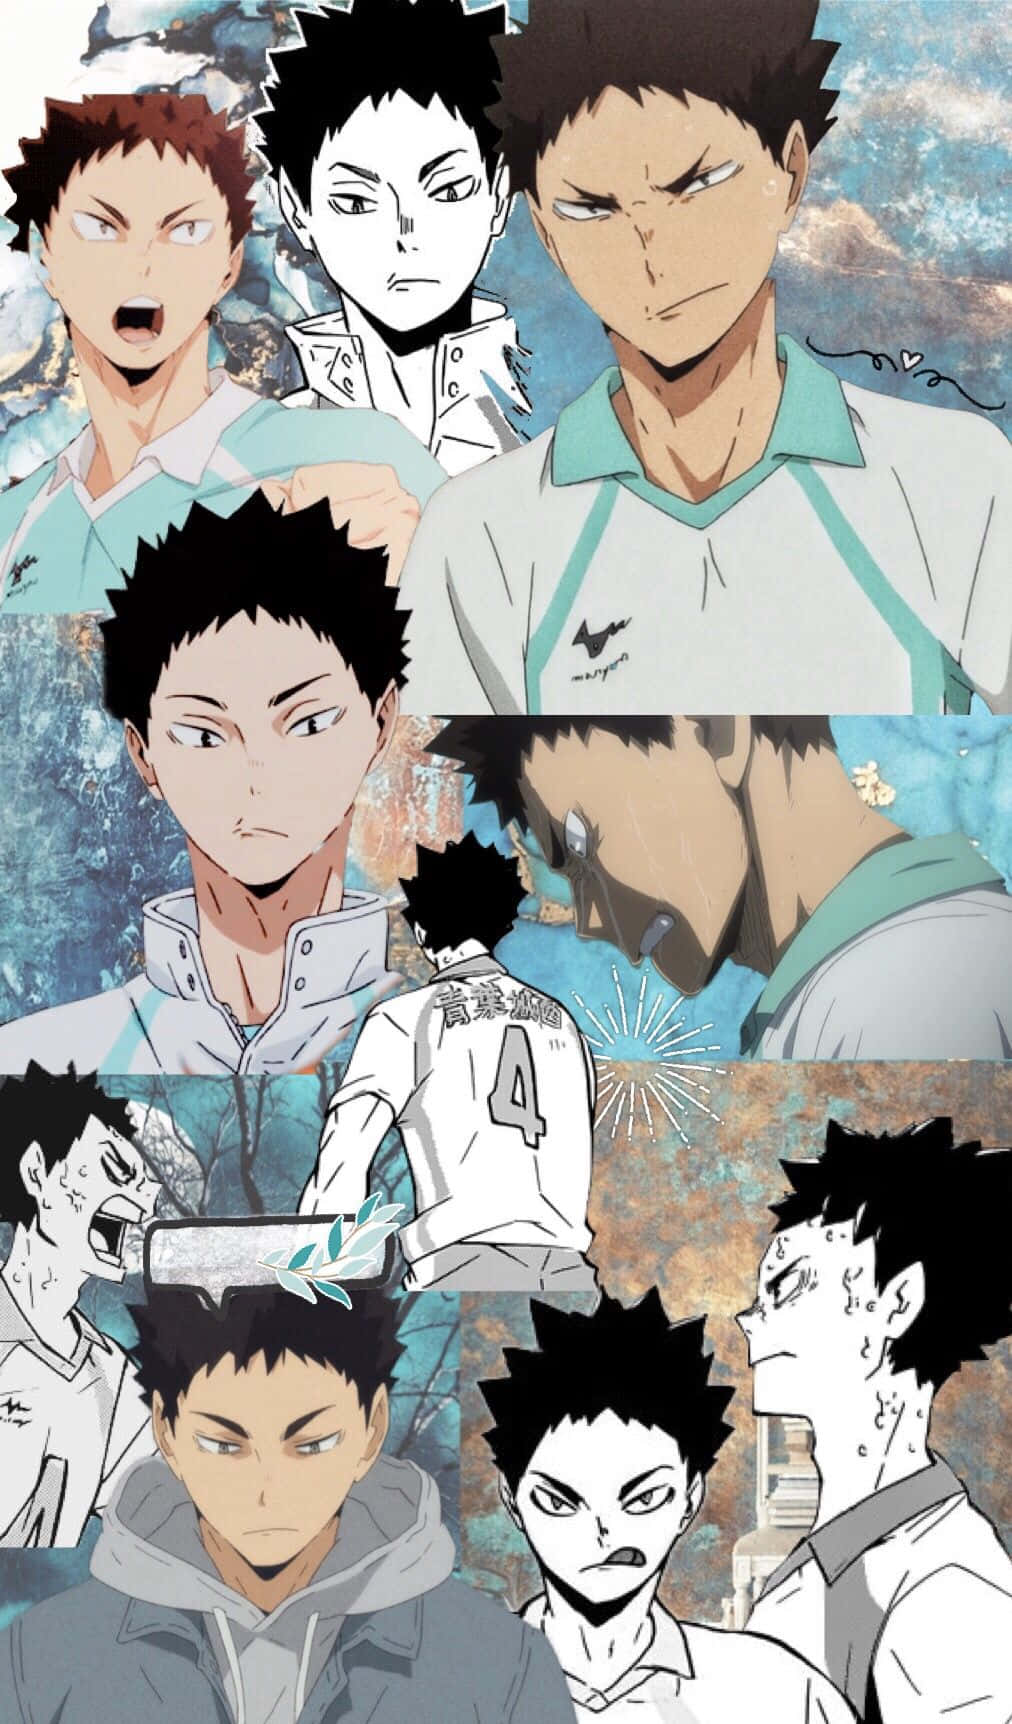 Iwaizumi Hajime In Action, Striking A Volleyball During A Match Background